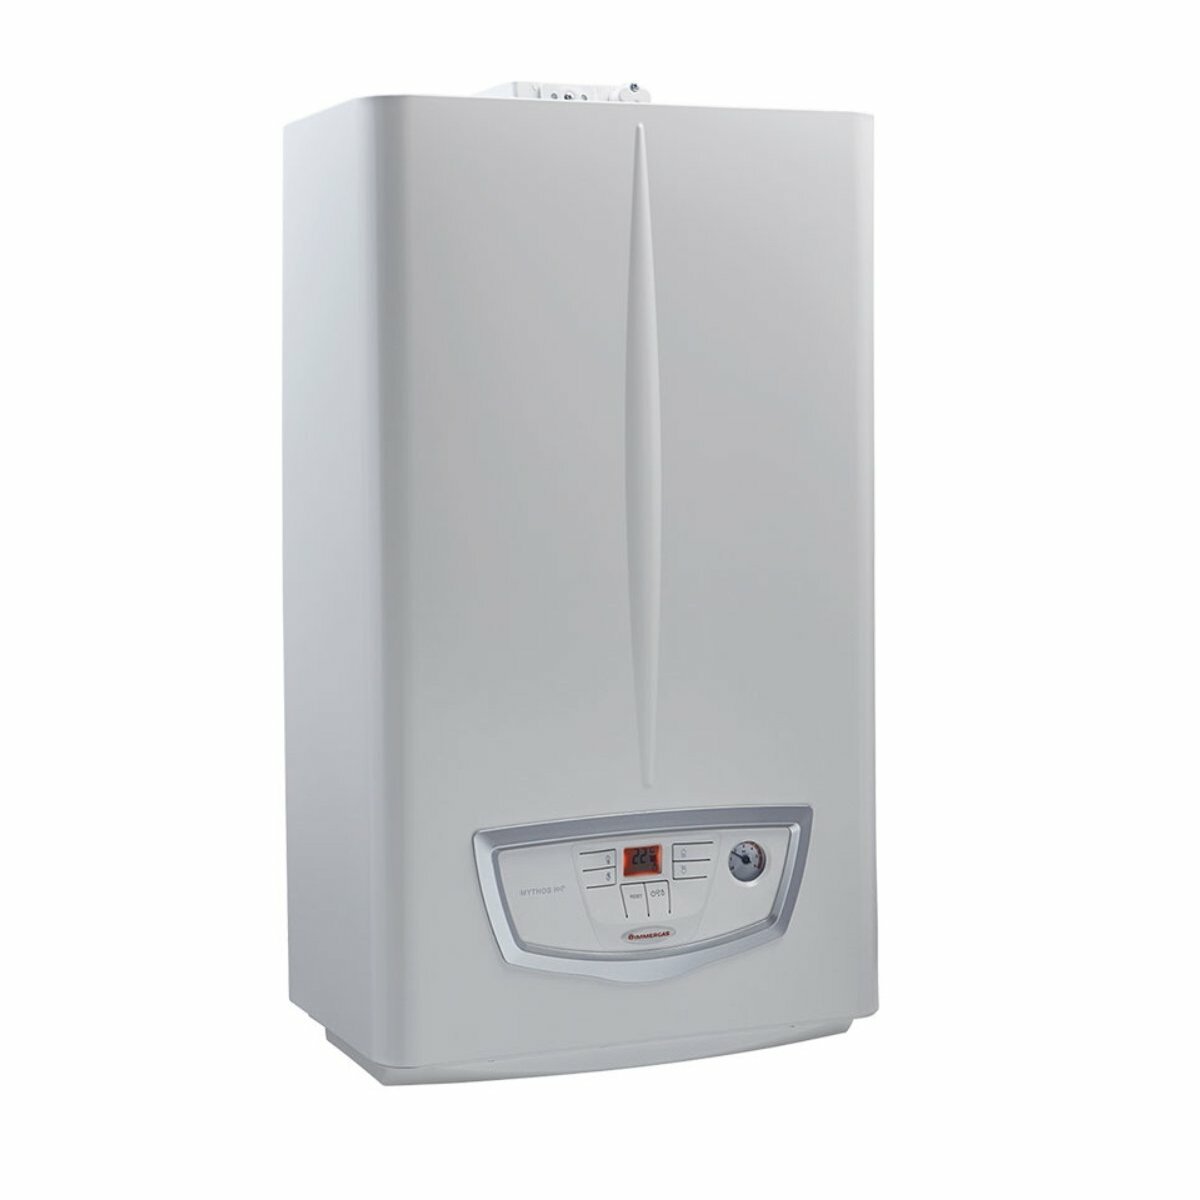 Immergas Mythos HP condensing boiler with sealed chamber 24 kW LPG